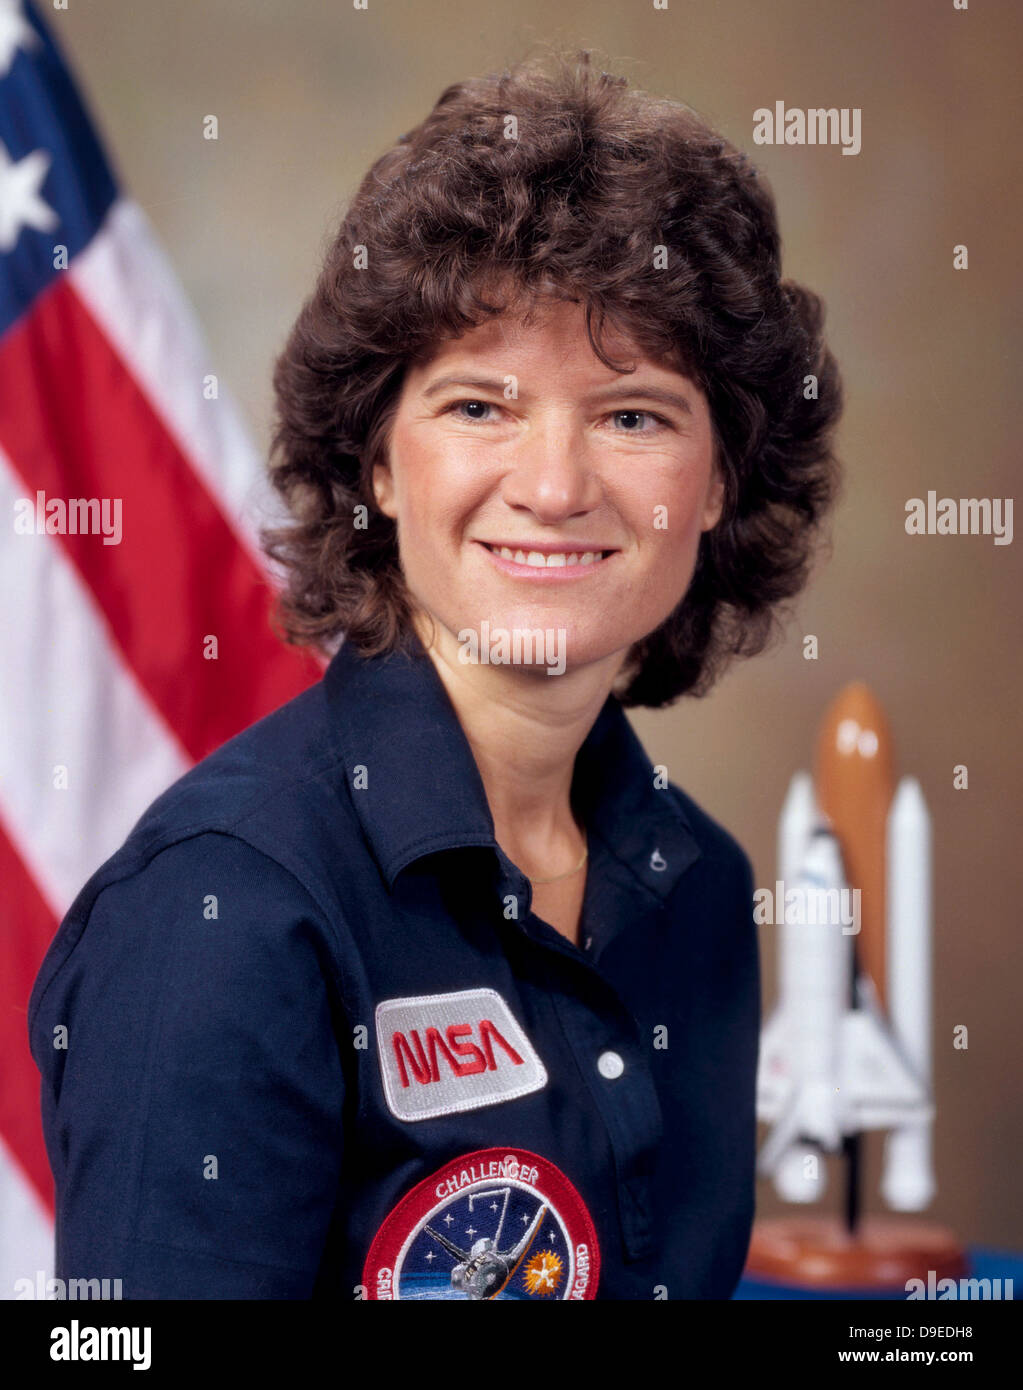 NASA astronaut Sally Ride in her official portrait July 10, 1984 in Houston, TX. Sally Ride became the first American woman to fly in space on June 18, 1983 aboard the shuttle Challenger. Stock Photo